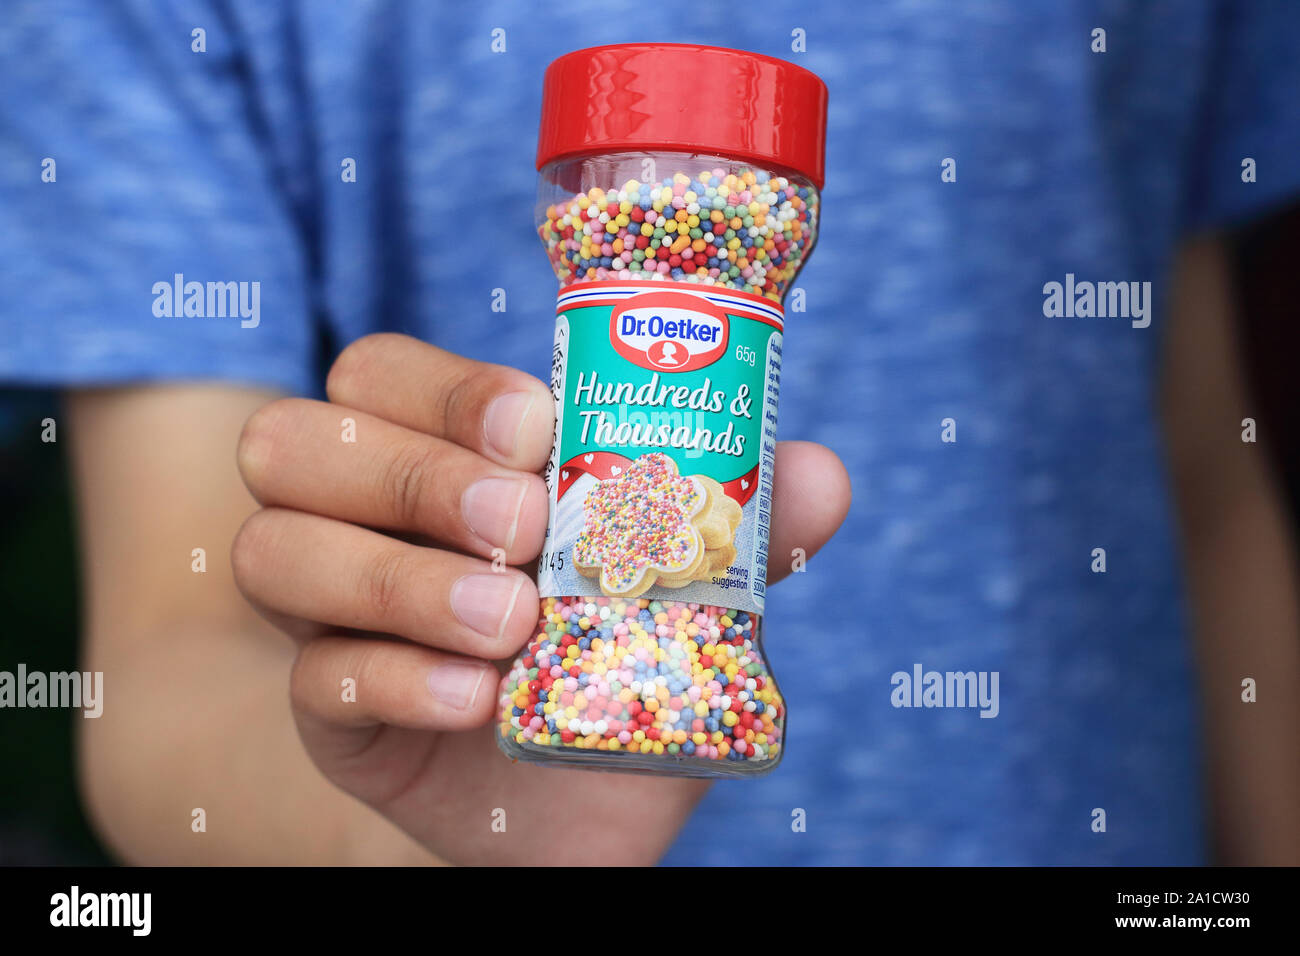 Hand holding Dr. Oetker Hundreds and Thousands edible colourful sprinkles Stock Photo